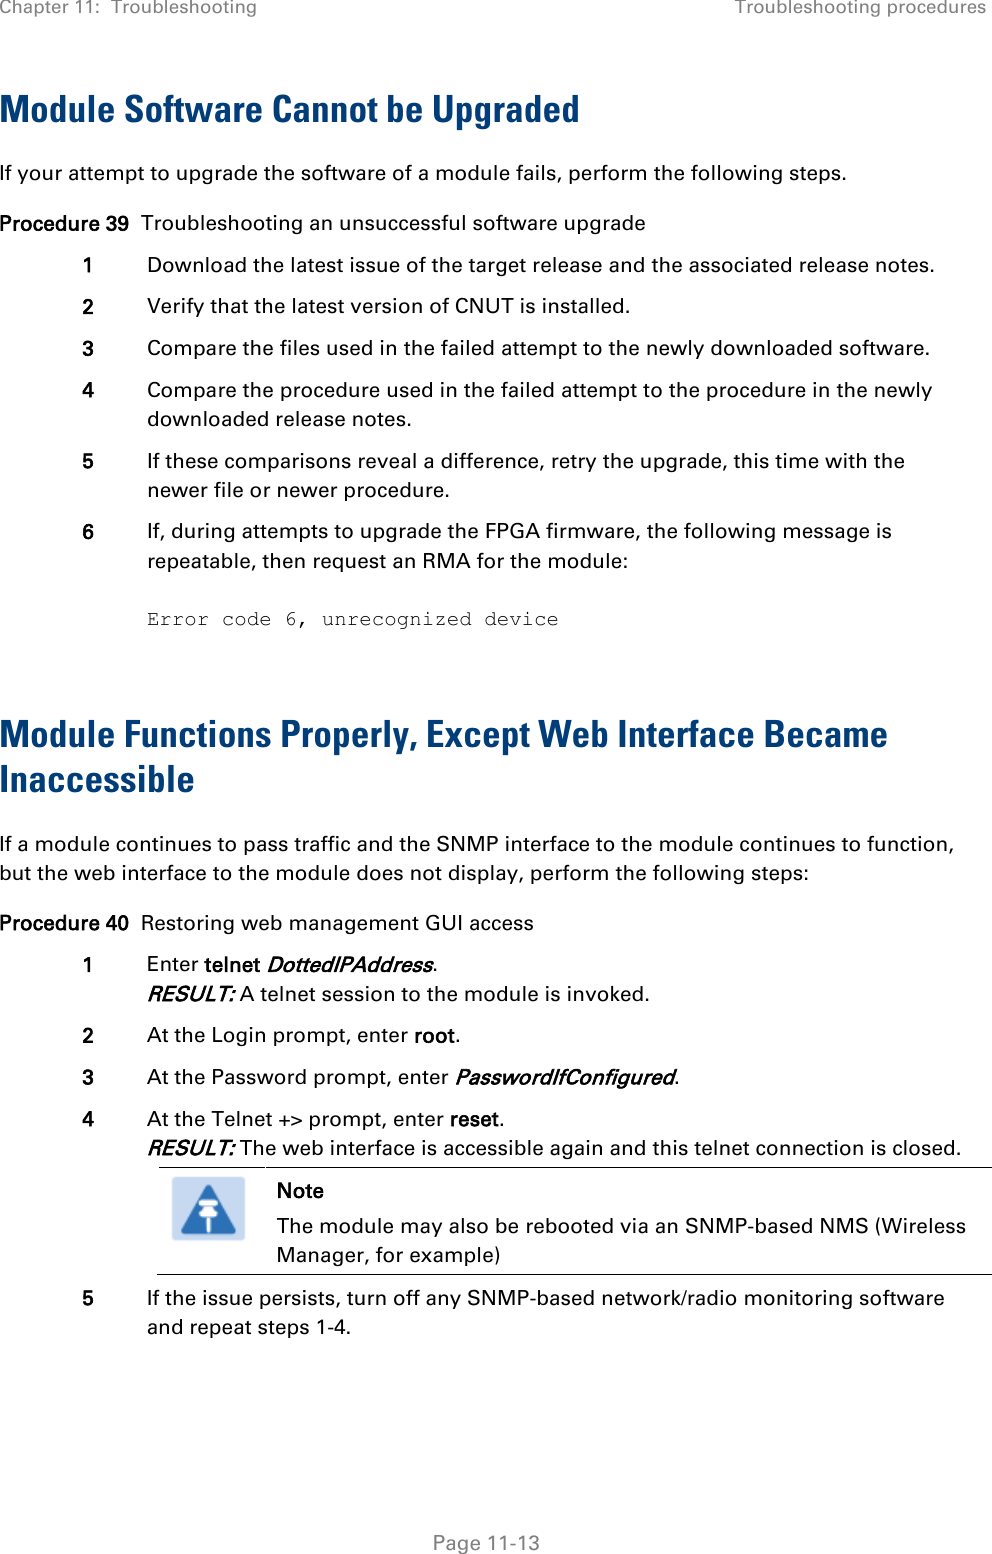 Chapter 11:  Troubleshooting Troubleshooting procedures   Page 11-13 Module Software Cannot be Upgraded If your attempt to upgrade the software of a module fails, perform the following steps. Procedure 39  Troubleshooting an unsuccessful software upgrade 1 Download the latest issue of the target release and the associated release notes. 2 Verify that the latest version of CNUT is installed. 3 Compare the files used in the failed attempt to the newly downloaded software. 4 Compare the procedure used in the failed attempt to the procedure in the newly downloaded release notes. 5 If these comparisons reveal a difference, retry the upgrade, this time with the newer file or newer procedure. 6 If, during attempts to upgrade the FPGA firmware, the following message is repeatable, then request an RMA for the module:  Error code 6, unrecognized device  Module Functions Properly, Except Web Interface Became Inaccessible If a module continues to pass traffic and the SNMP interface to the module continues to function, but the web interface to the module does not display, perform the following steps: Procedure 40  Restoring web management GUI access 1 Enter telnet DottedIPAddress. RESULT: A telnet session to the module is invoked. 2 At the Login prompt, enter root. 3 At the Password prompt, enter PasswordIfConfigured. 4 At the Telnet +&gt; prompt, enter reset. RESULT: The web interface is accessible again and this telnet connection is closed.  Note The module may also be rebooted via an SNMP-based NMS (Wireless Manager, for example)  5 If the issue persists, turn off any SNMP-based network/radio monitoring software and repeat steps 1-4.  